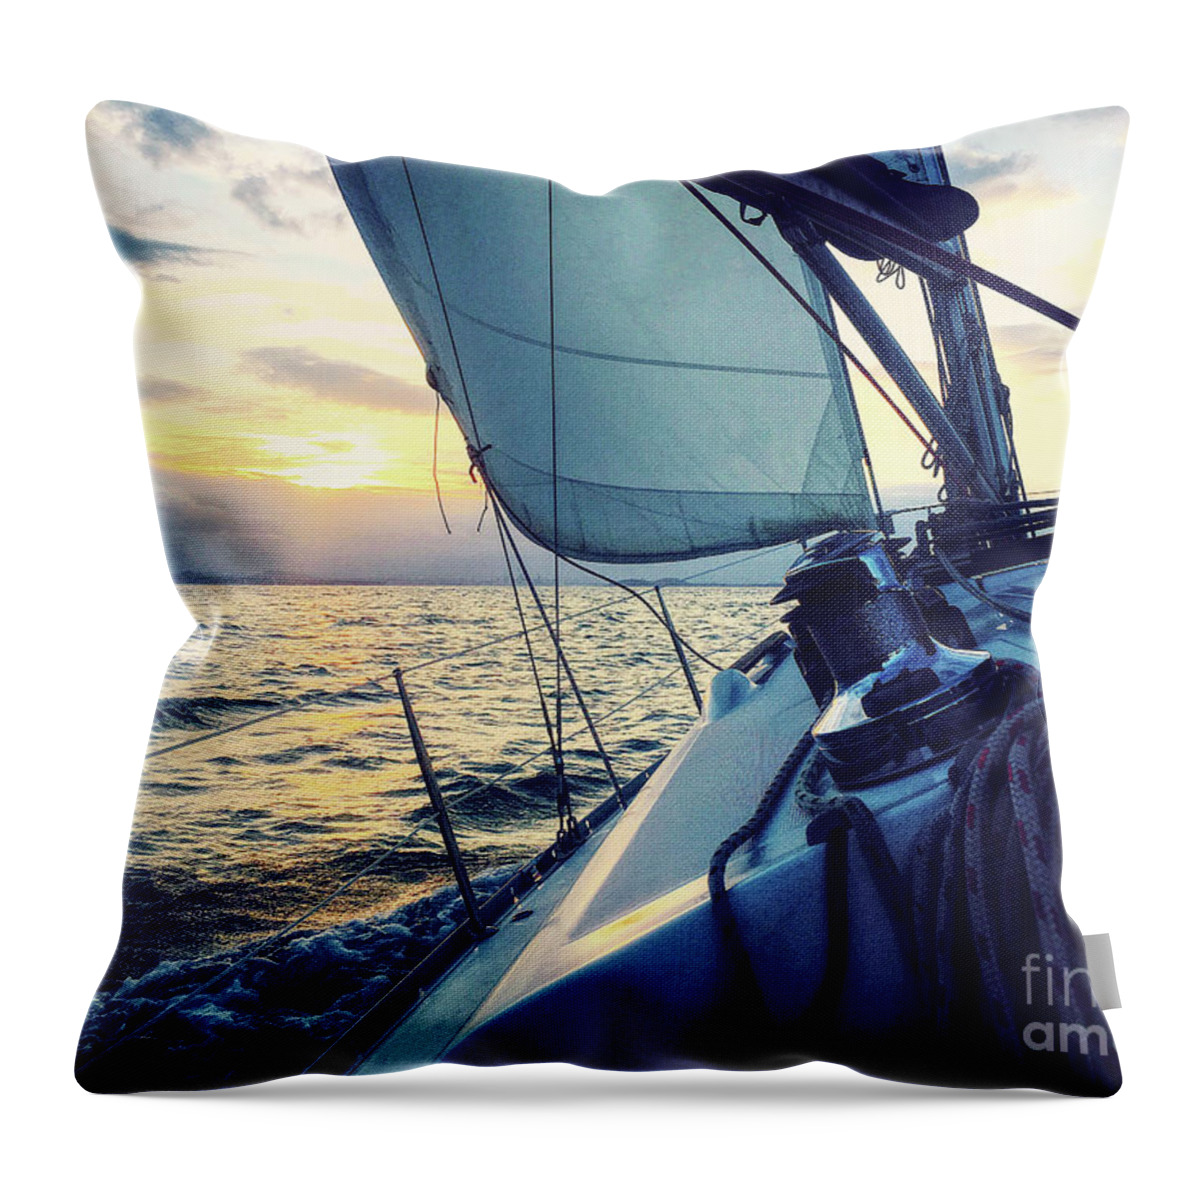 Sunset Throw Pillow featuring the photograph Sailing Into The Sunset by Phil Perkins